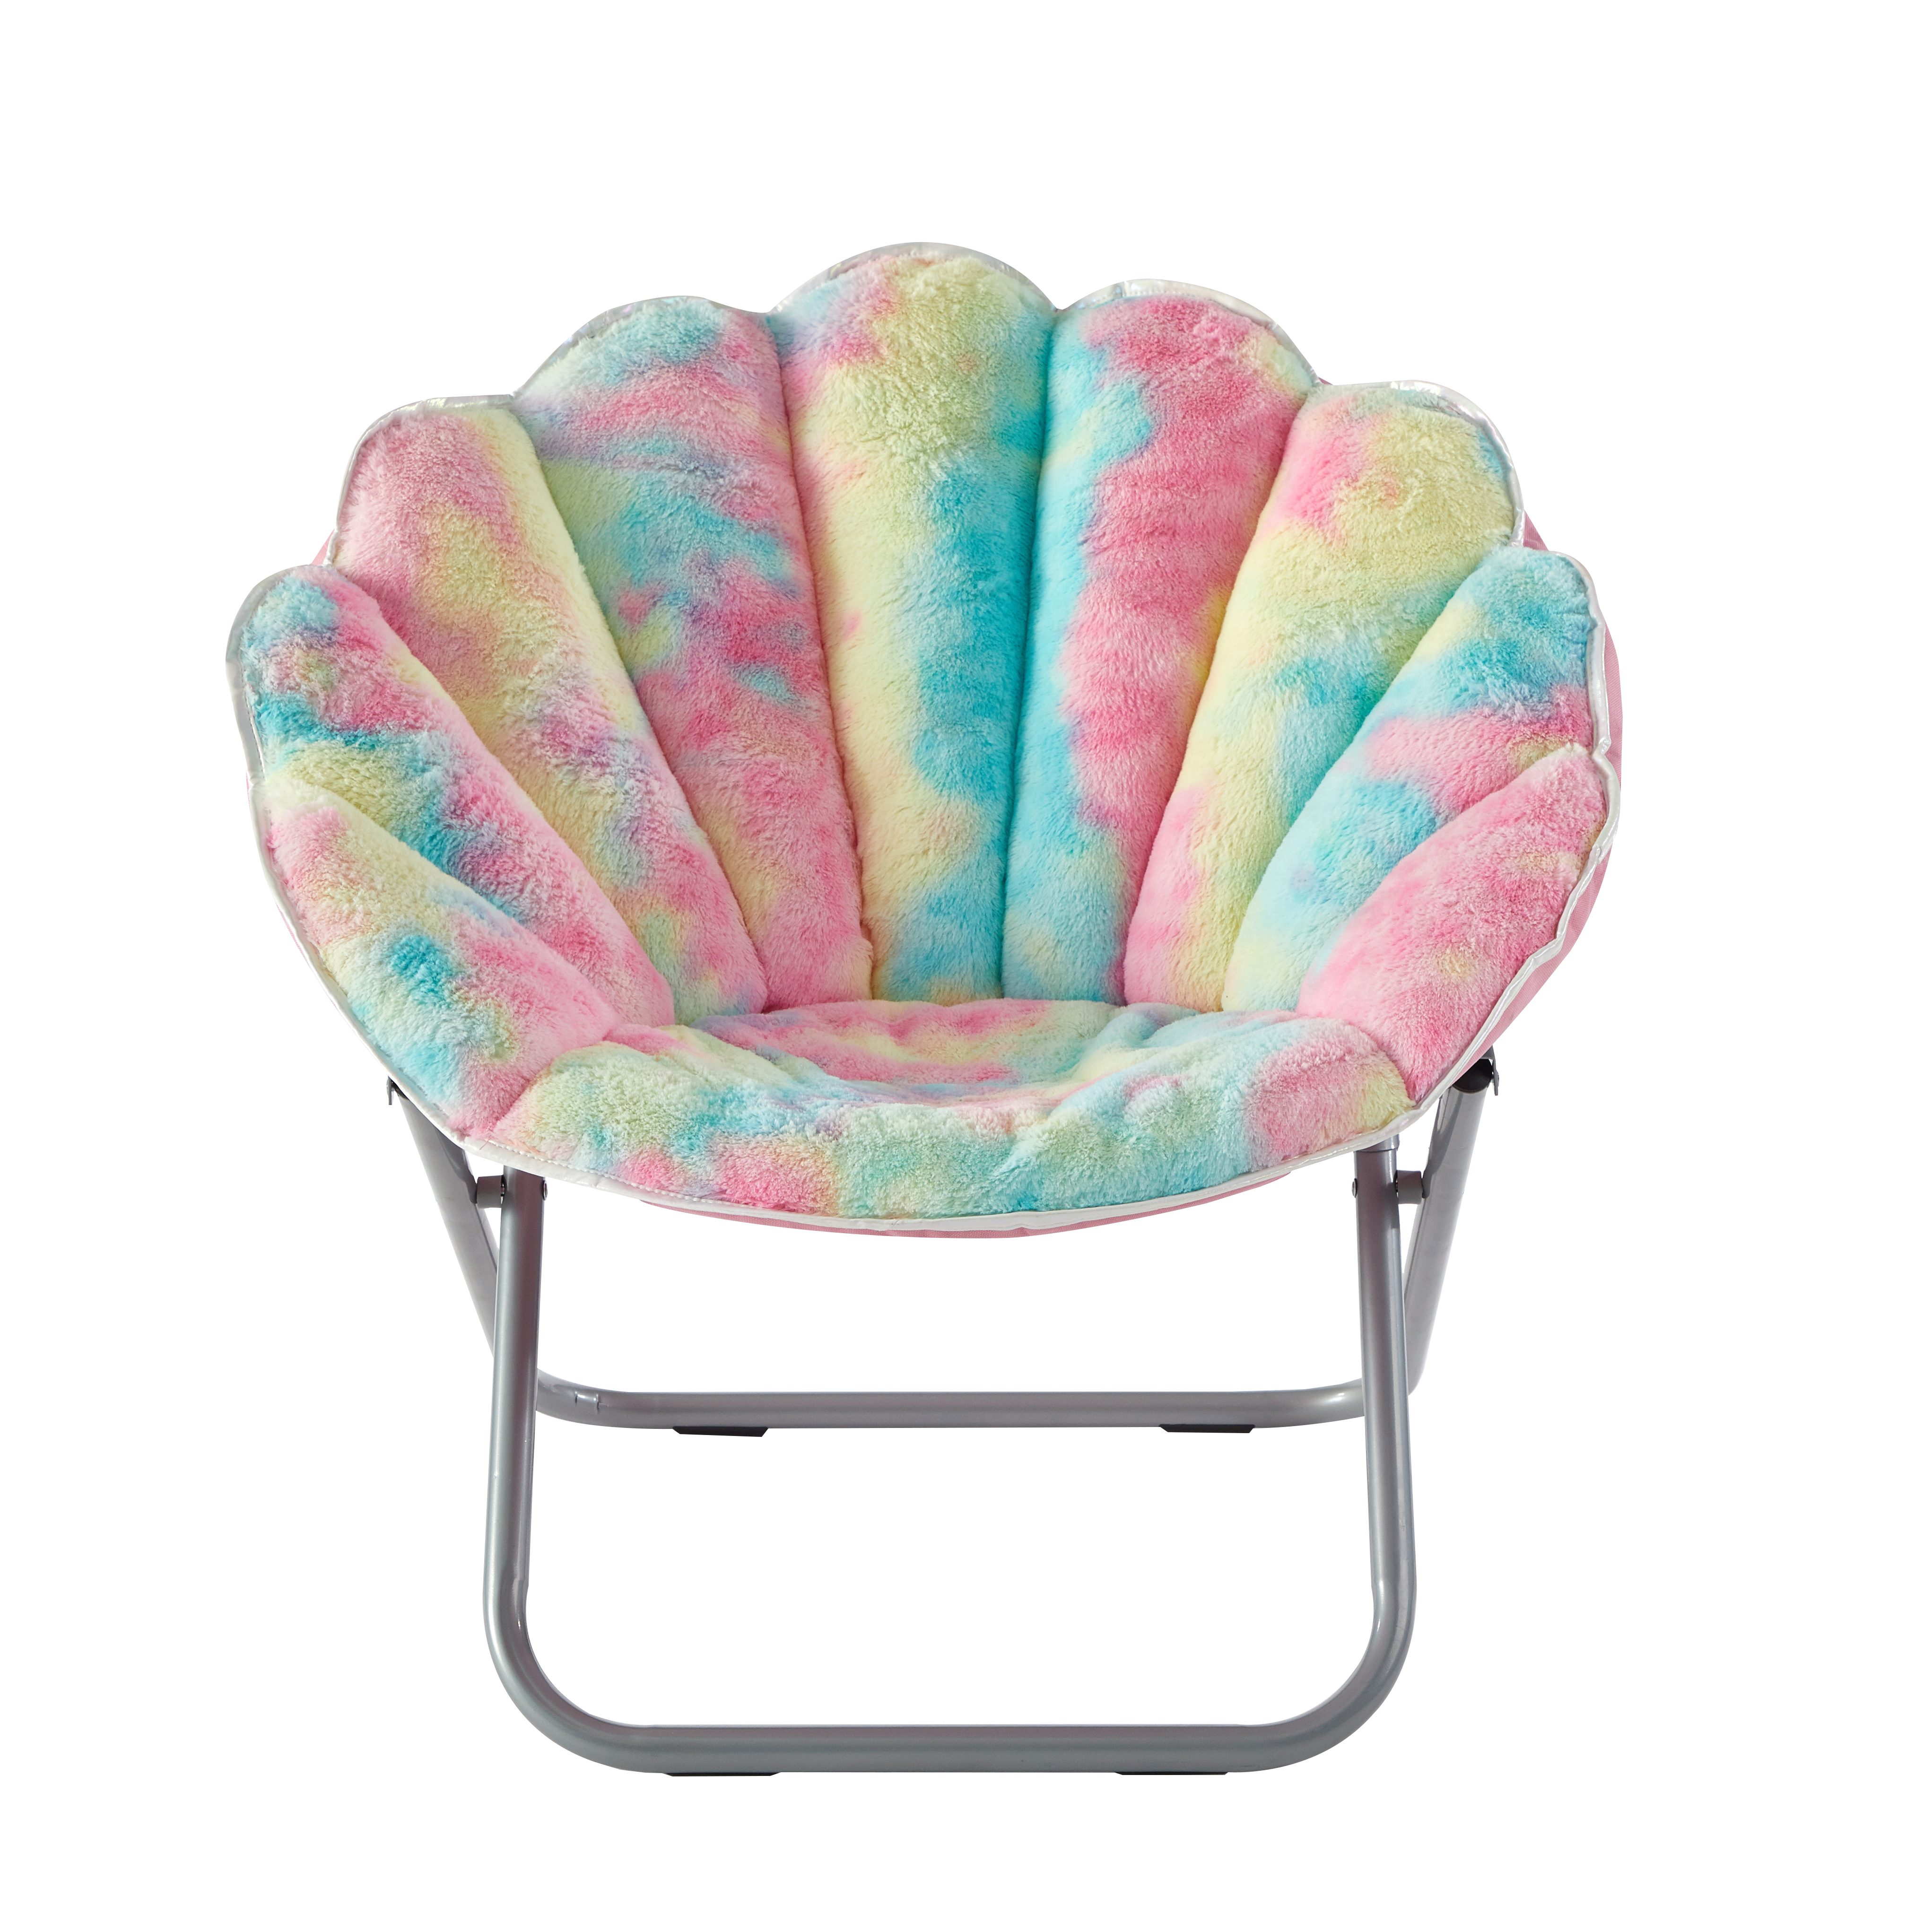 Justice Faux Fur Scallop Saucer™ Chair with Holographic Trim, Rainbow Tie Dye Pink - image 5 of 8